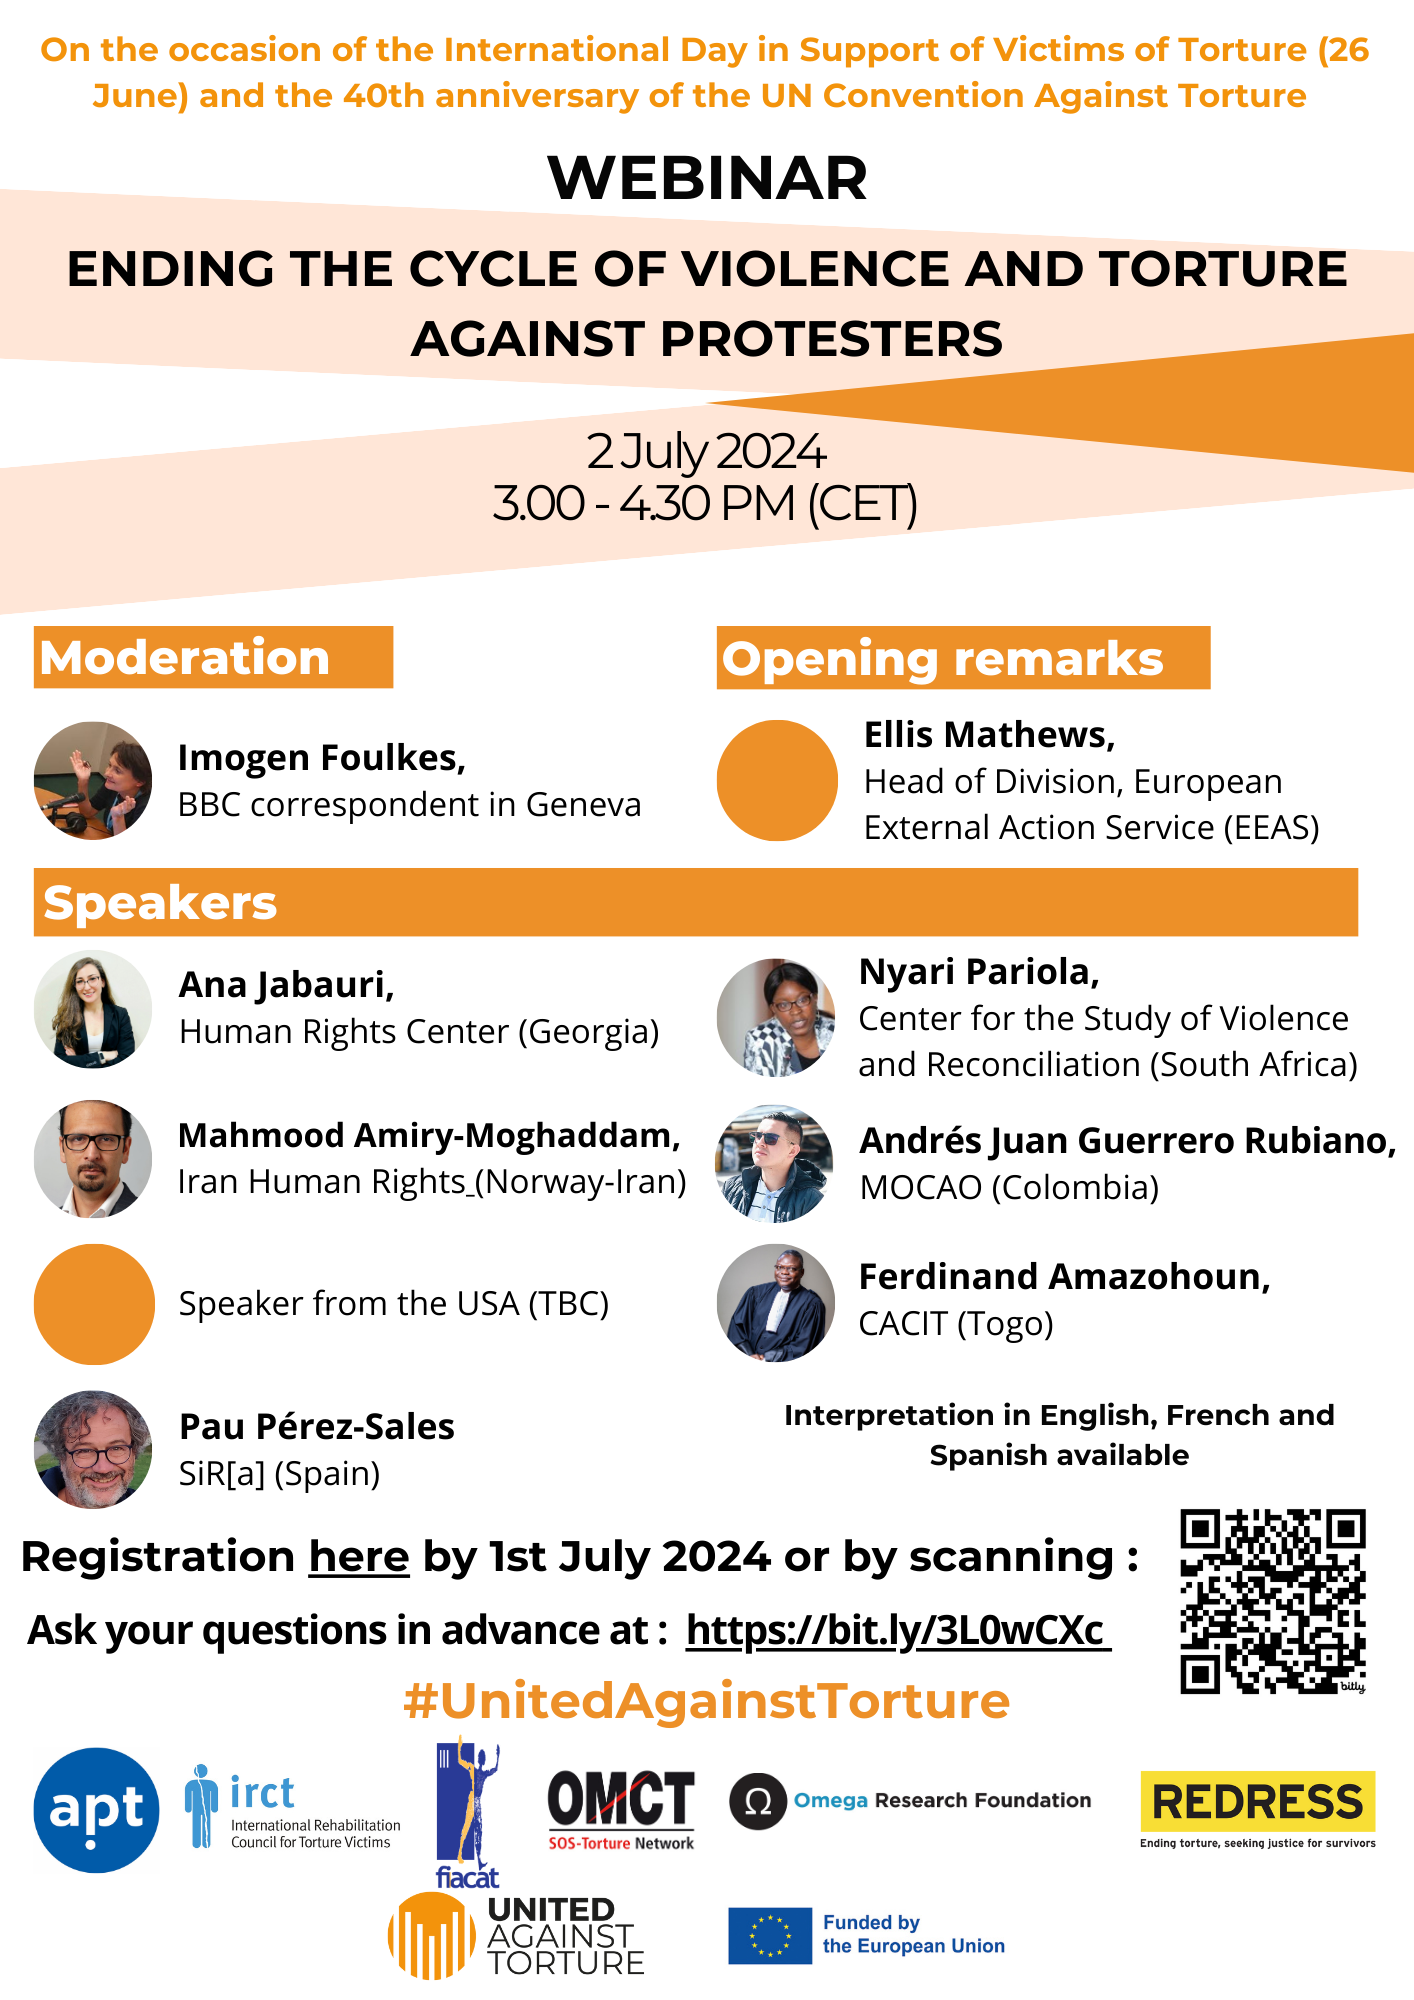 Webinar: Ending the Cycle of Violence and Torture Against Protesters